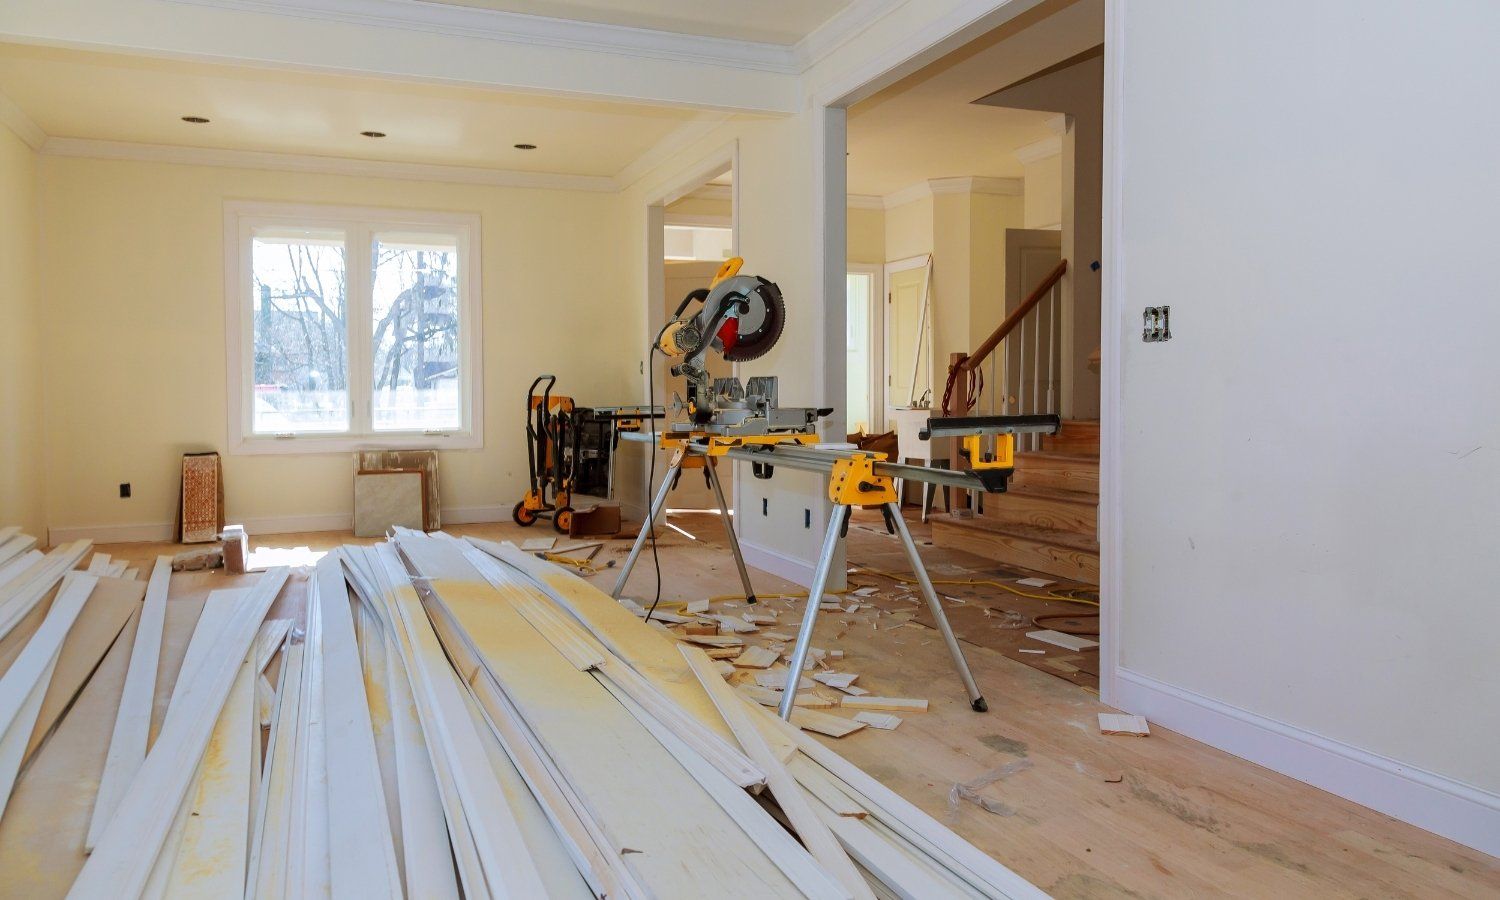 Home Remodels and Renovations